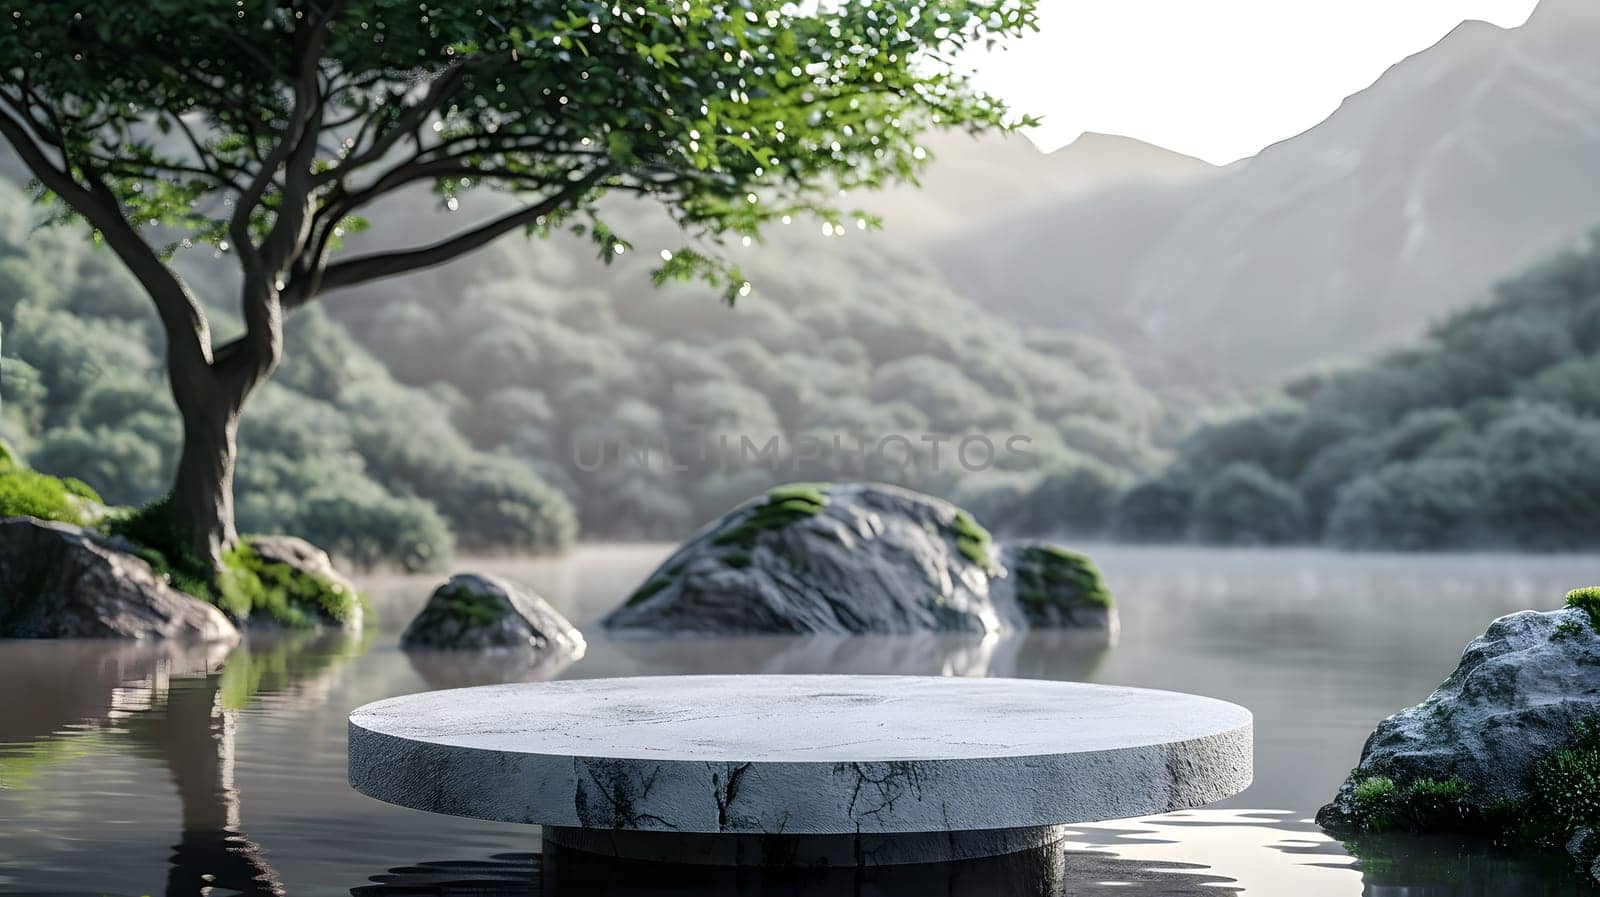 A marble table is surrounded by rocks and trees in the middle of a lake, creating a serene natural landscape with water reflecting the sky